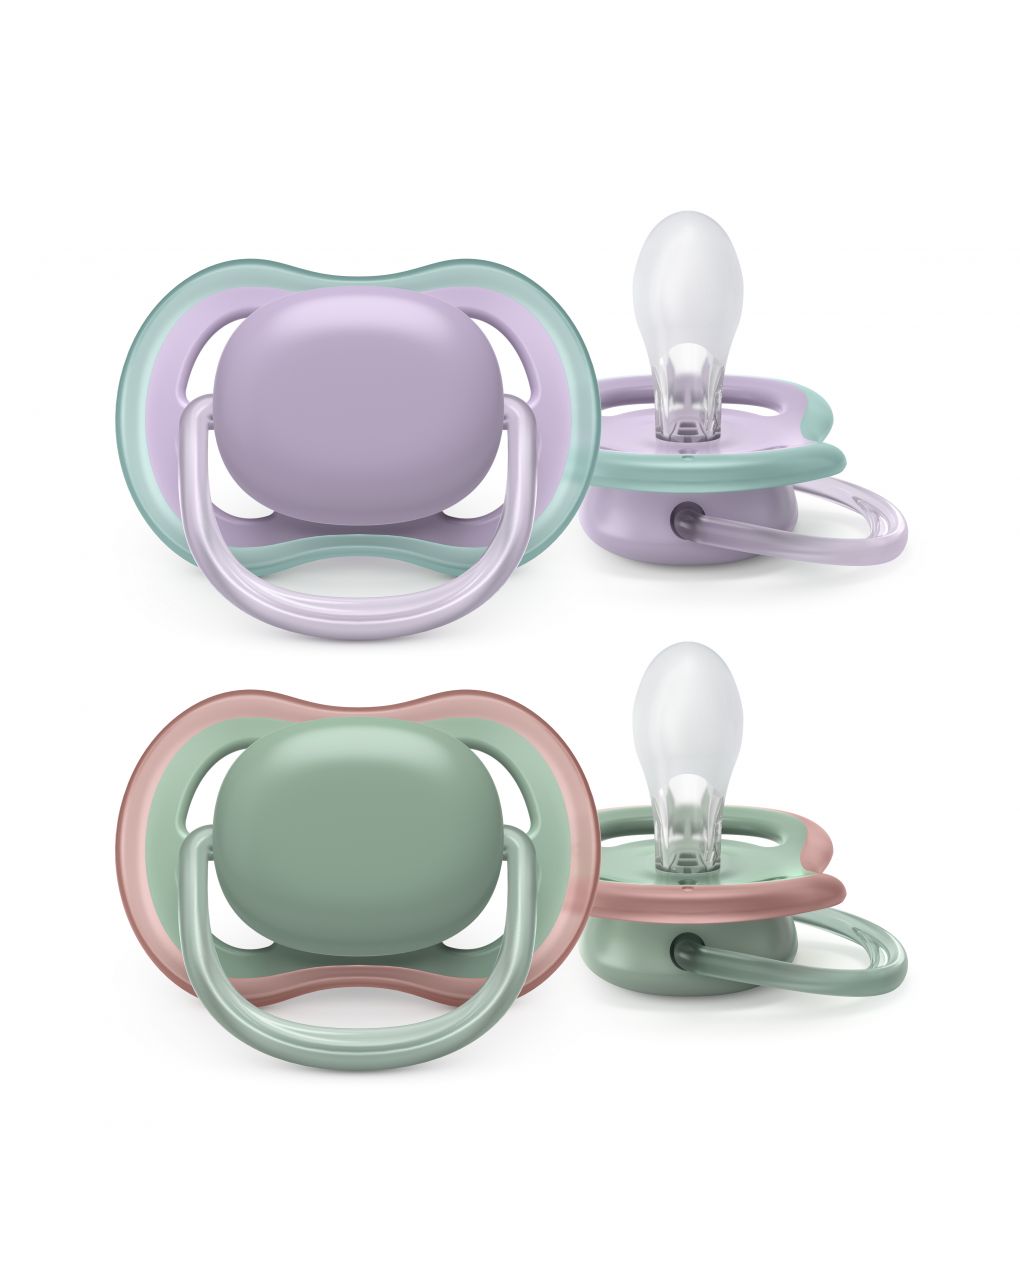 2 chupetes ultra air 6-18m - lila/verde - philips avent - Philips Avent